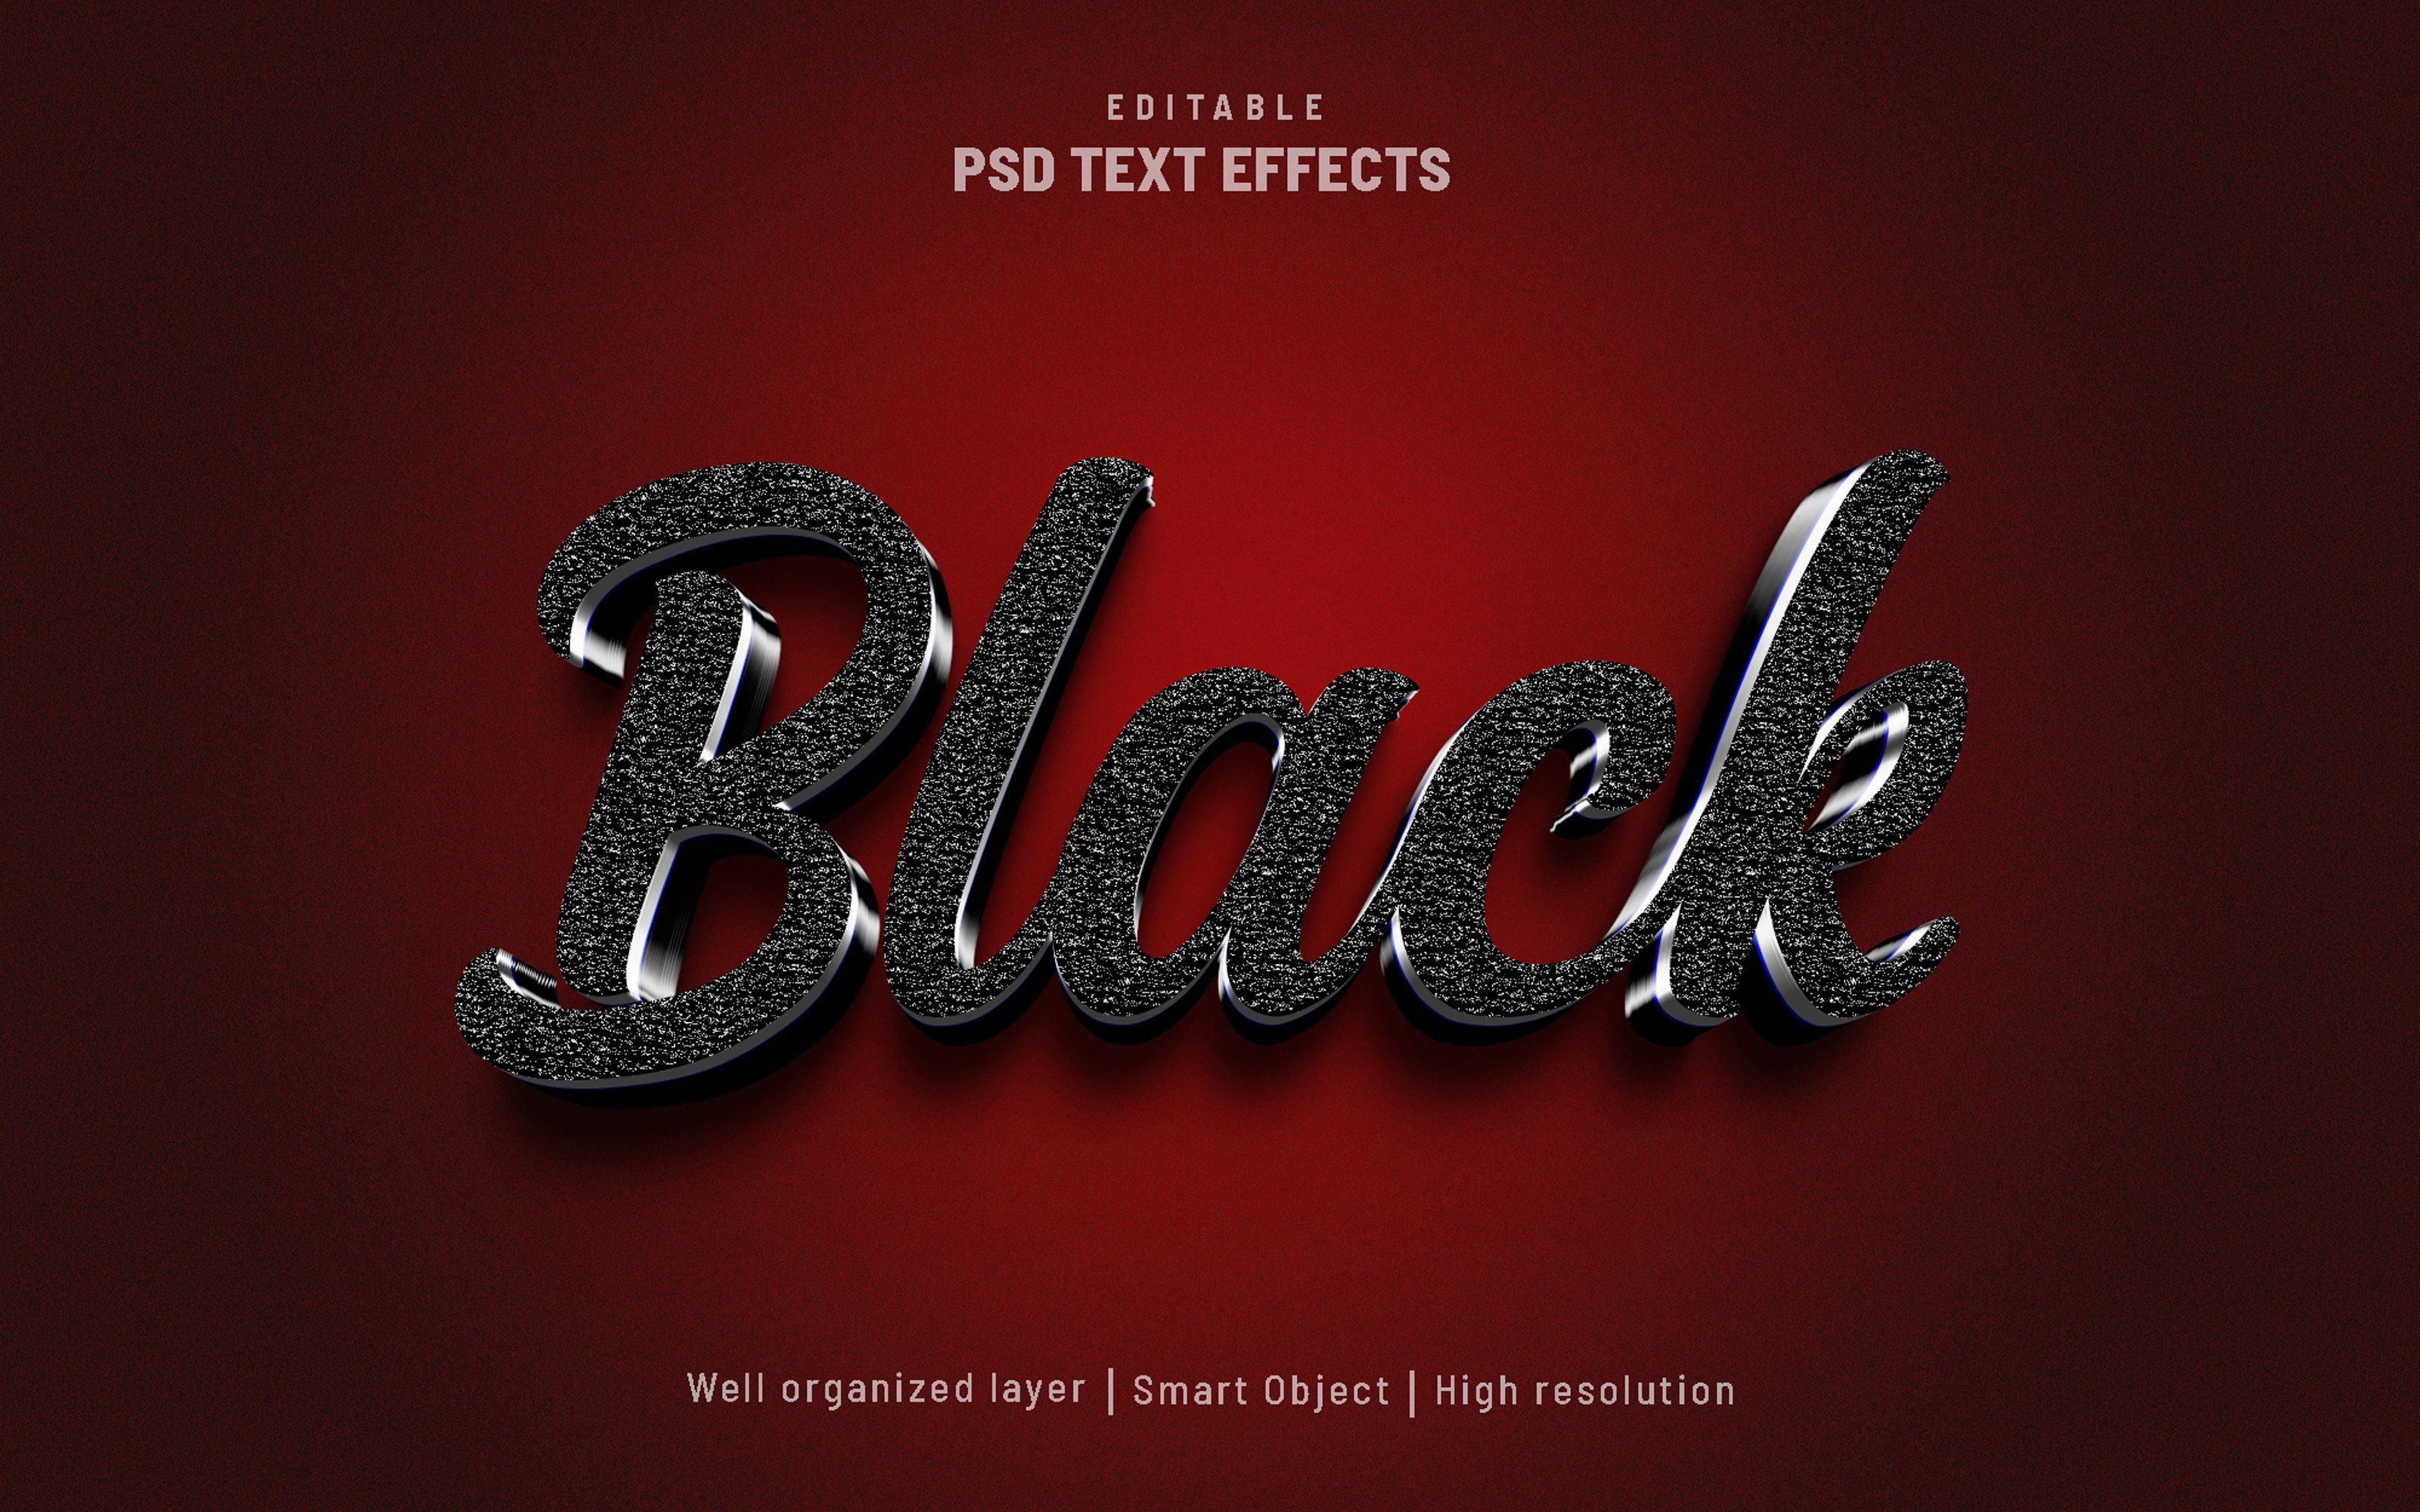 Black editable text effect PSDcover image.